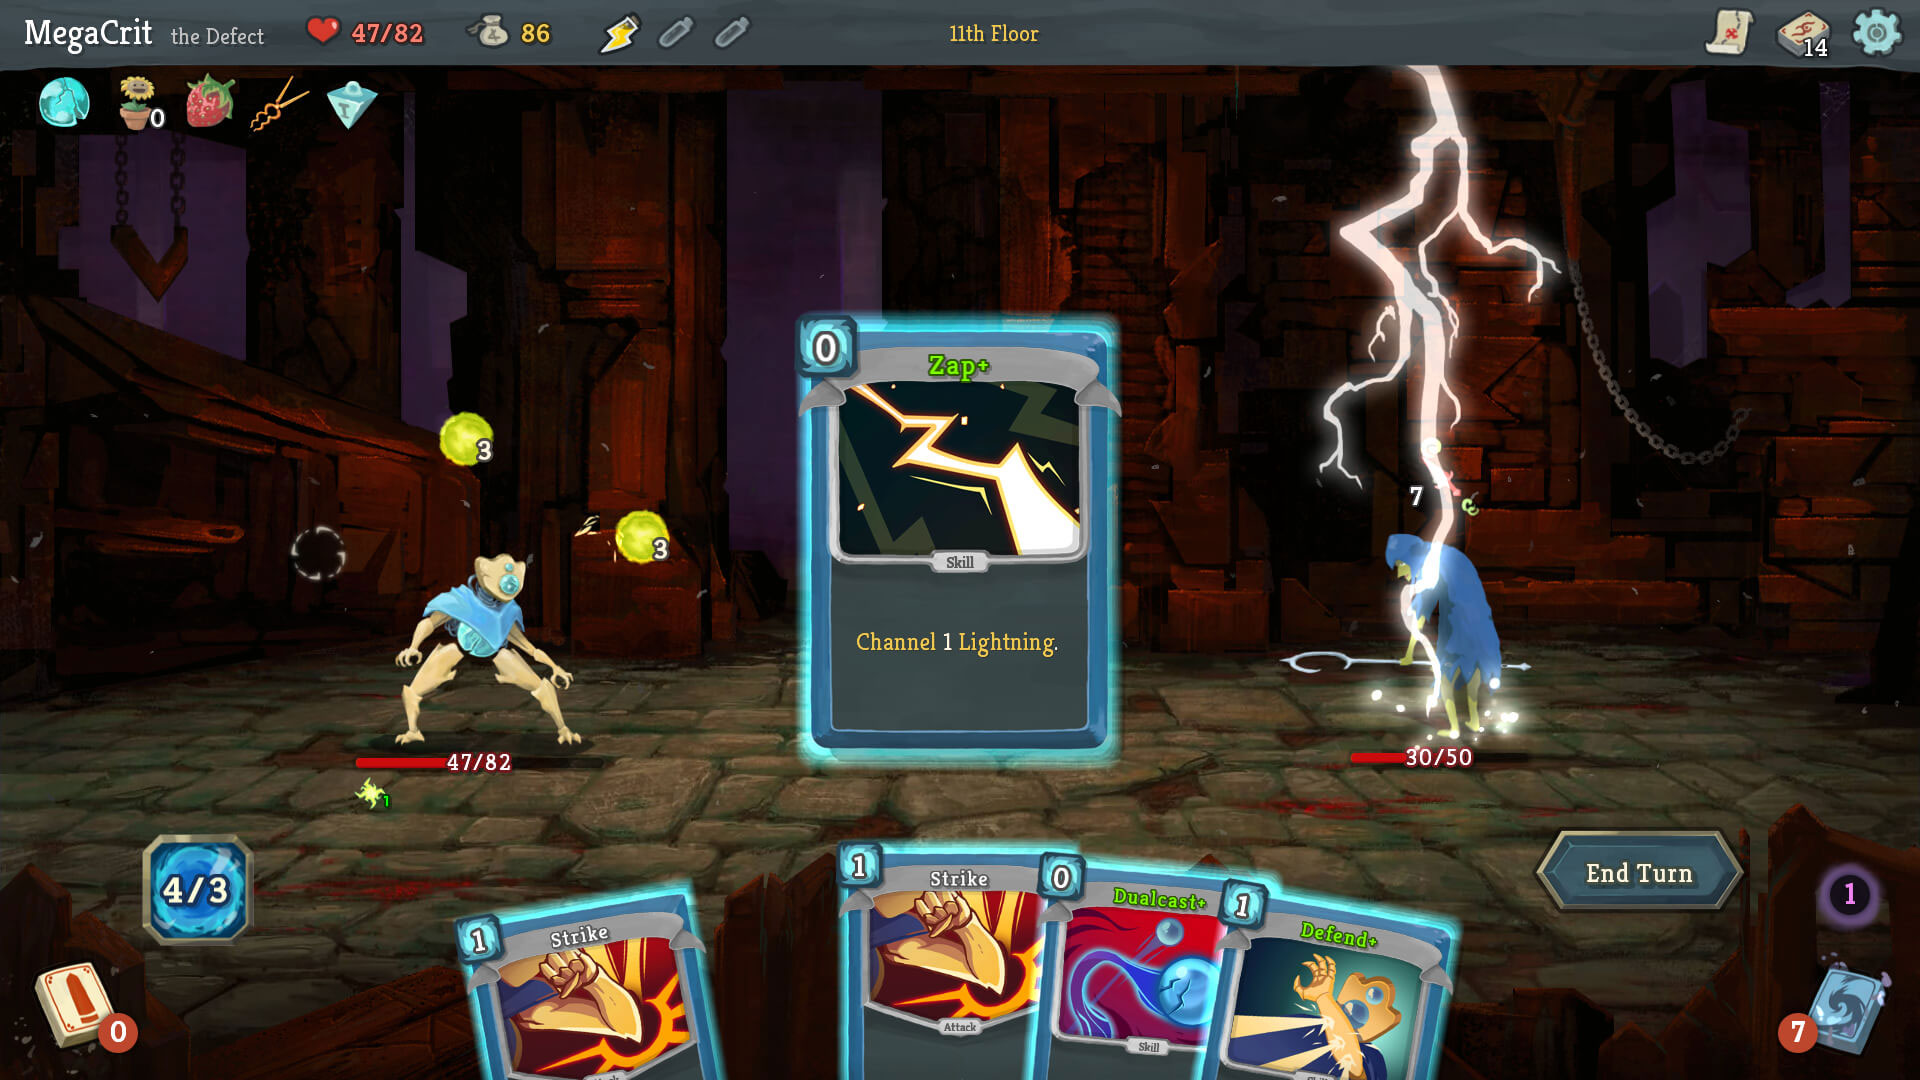 My Favorite Games to Play on the Steam Deck - Slay the Spire